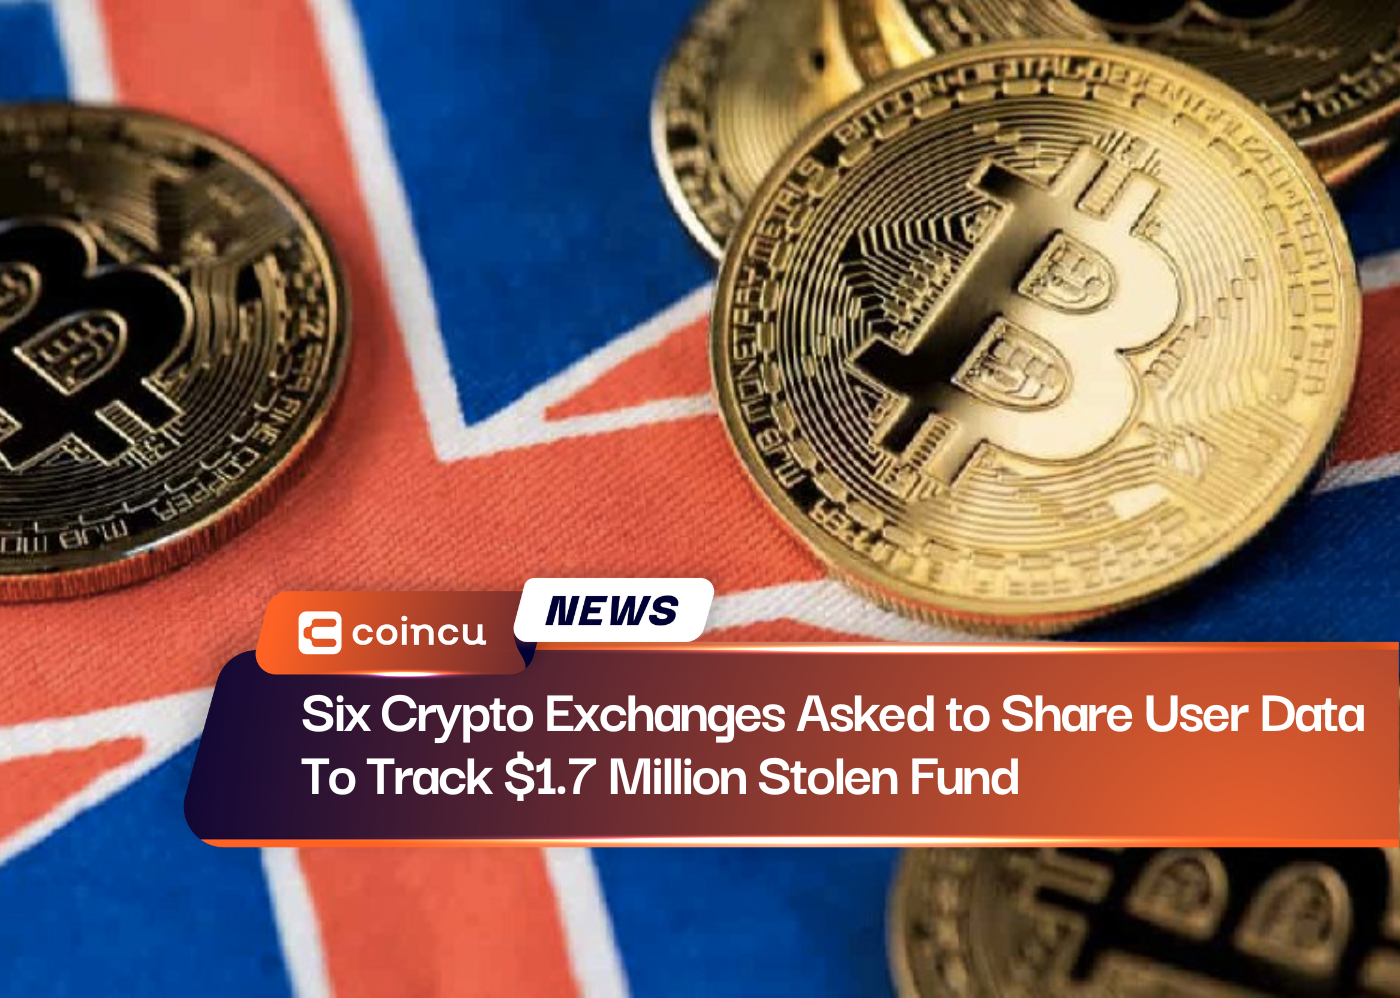 Six Crypto Exchanges Asked to Share User Data To Track $1.7 Million Stolen Fund